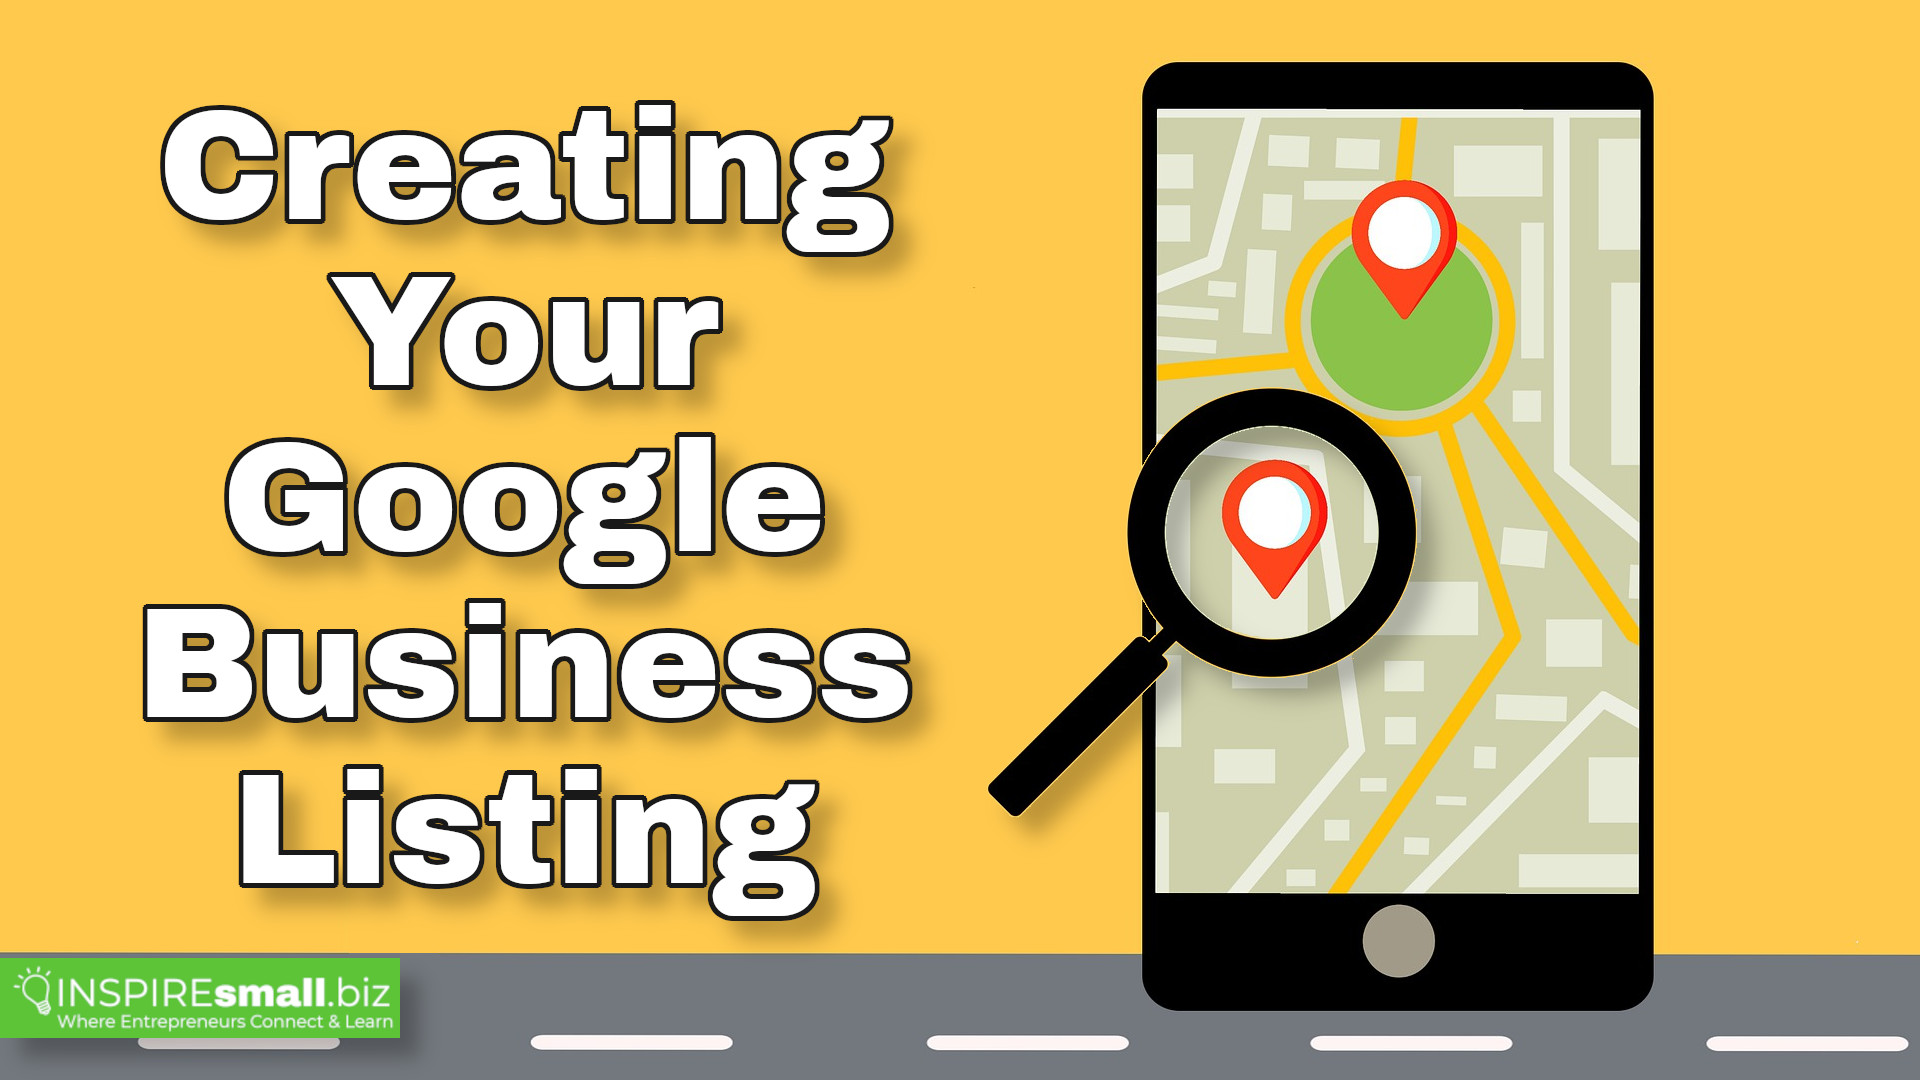 Creating Your Google Business Listing